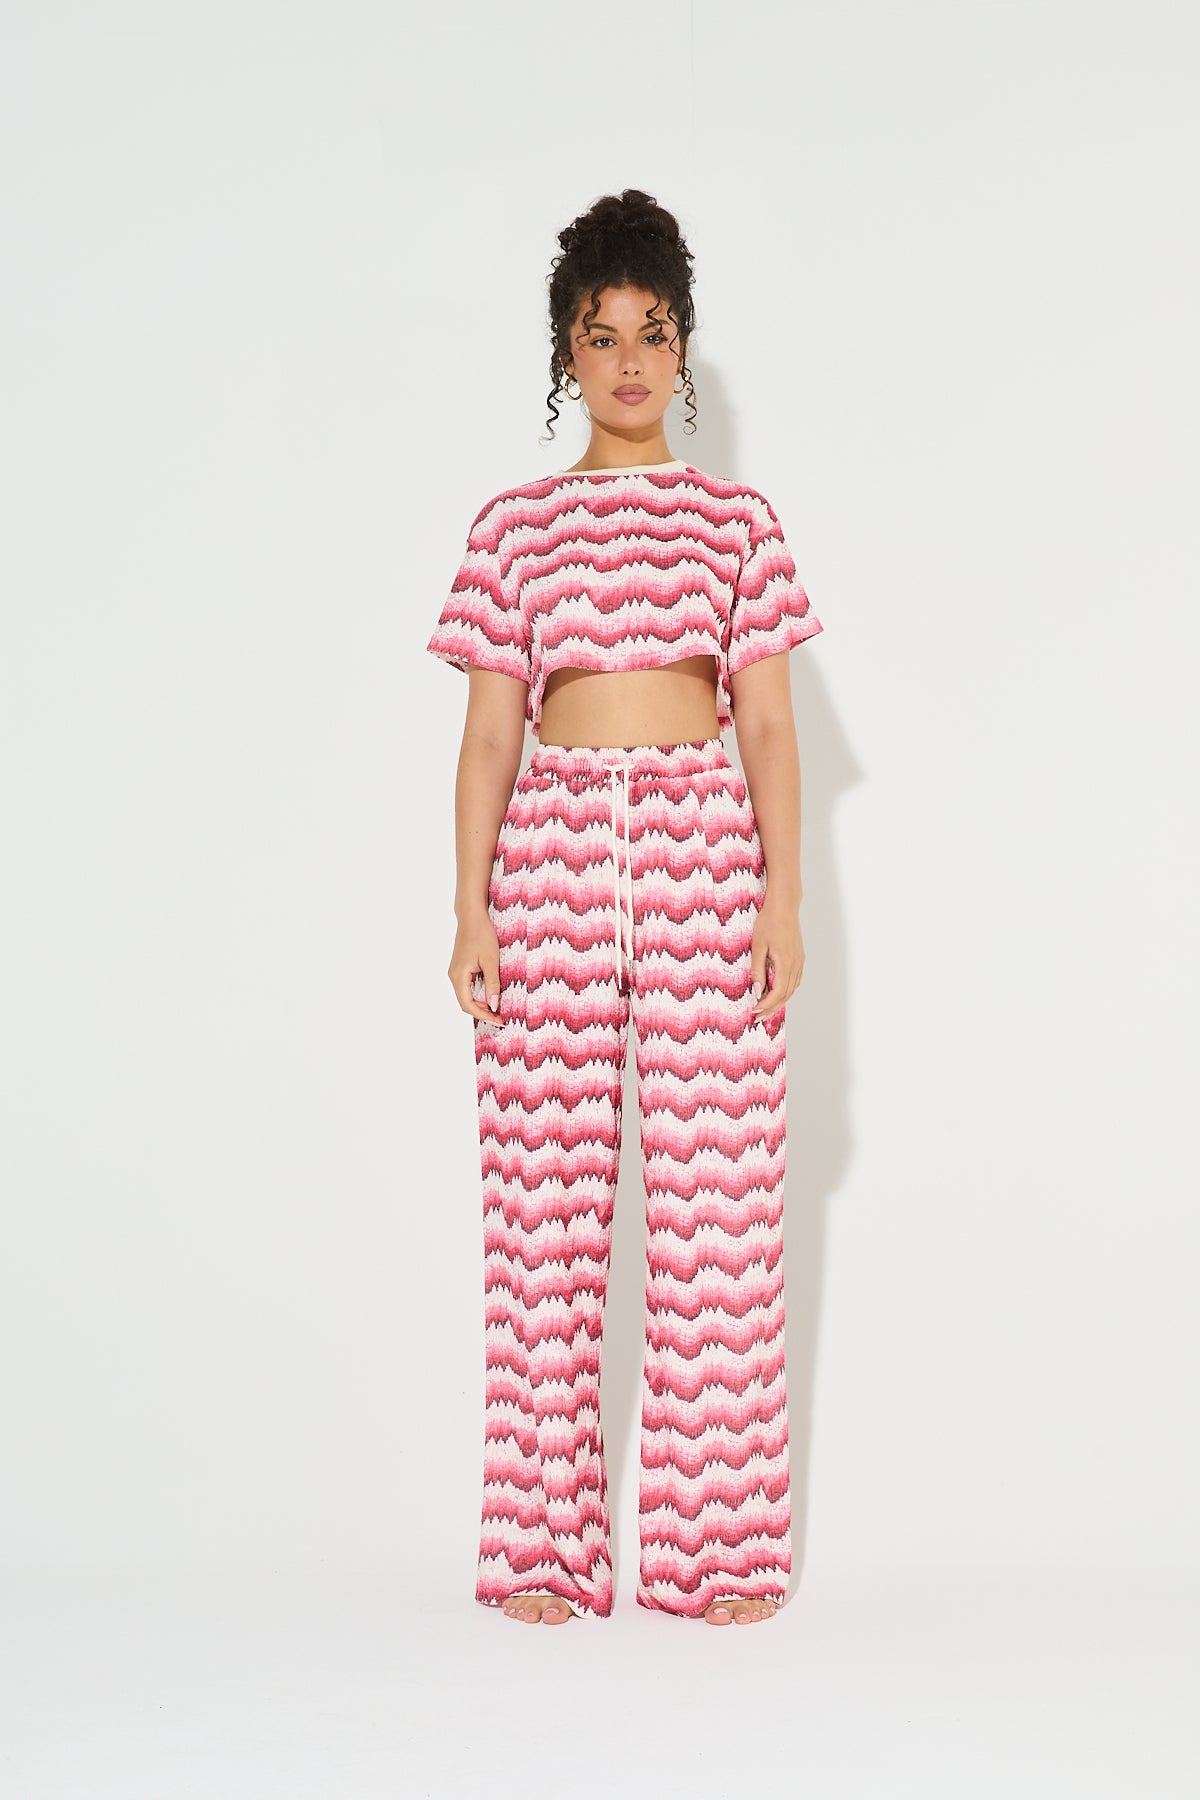 ARIA Red & Pink Printed Top and Pant Co Ord